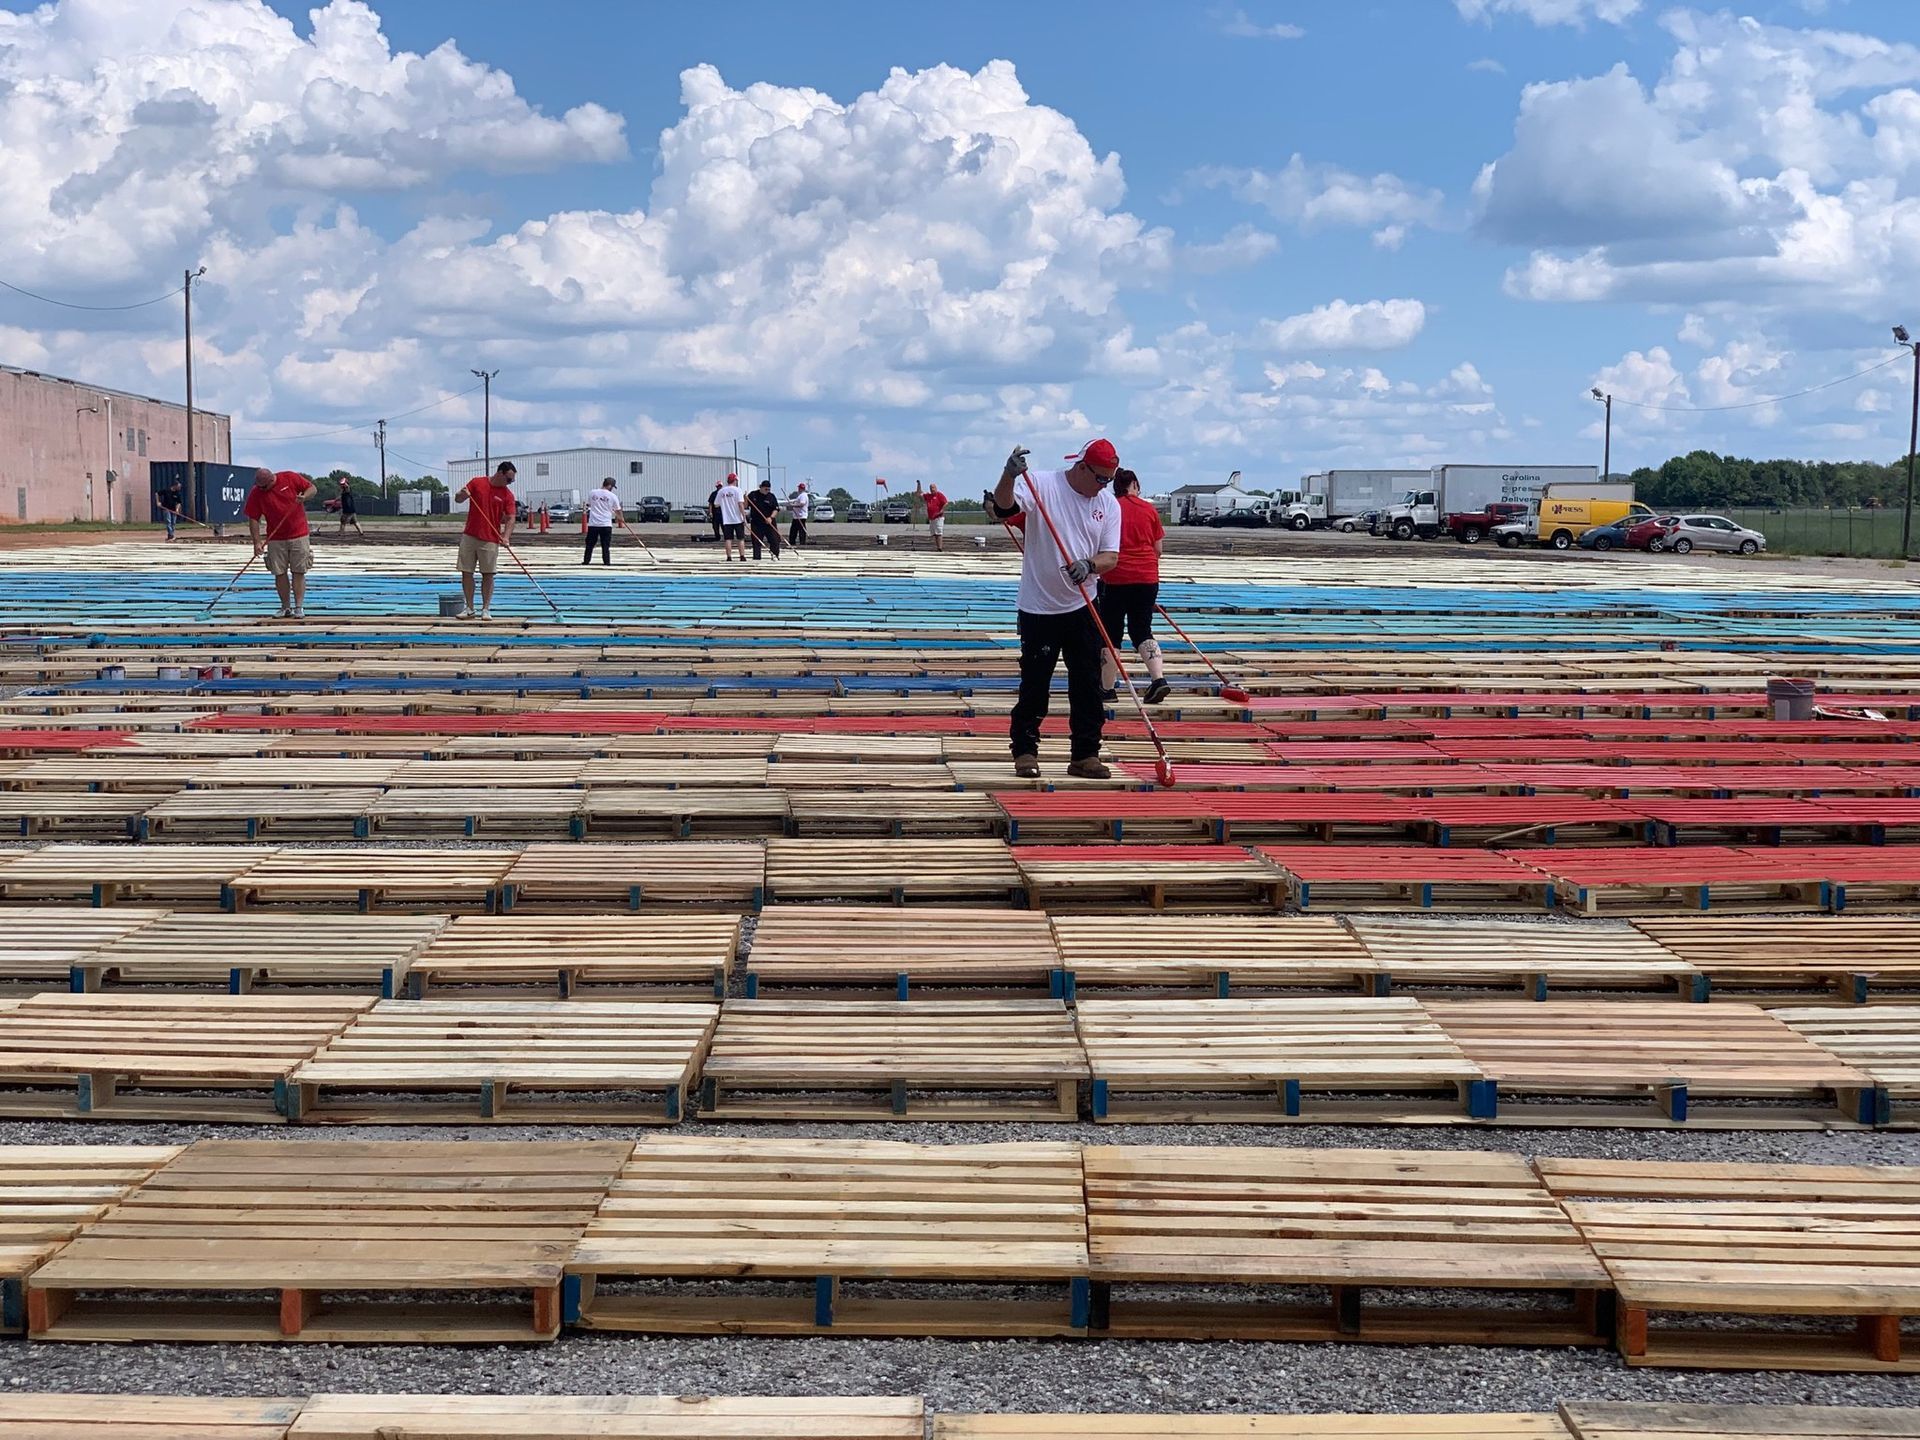 
World's Largest Pallet Painting, world record in Greenville, South Carolina